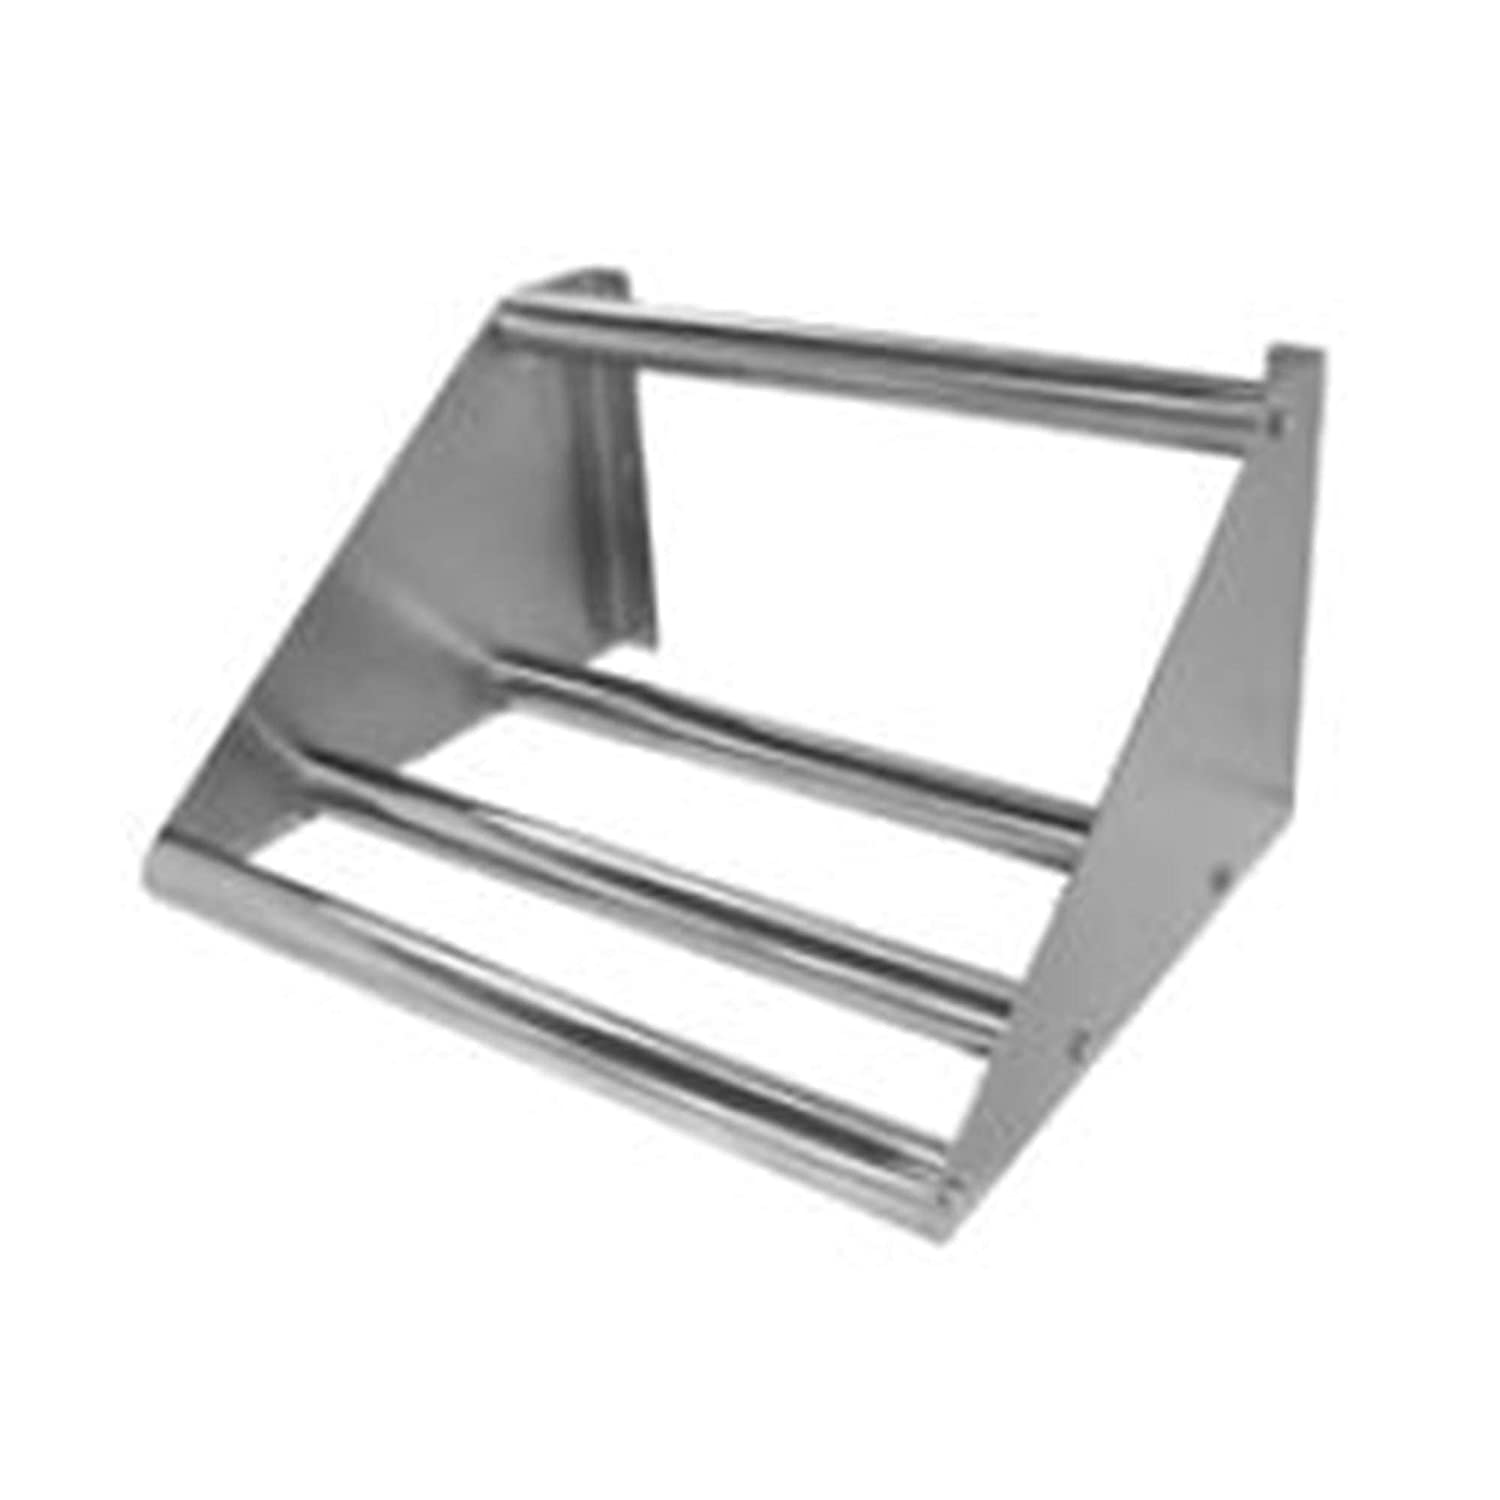 GSW Stainless Steel Tubular Dish Table Sorting Shelf for Washing and Storage, 62”W x 18”D x 11-1/4”H (62"W)